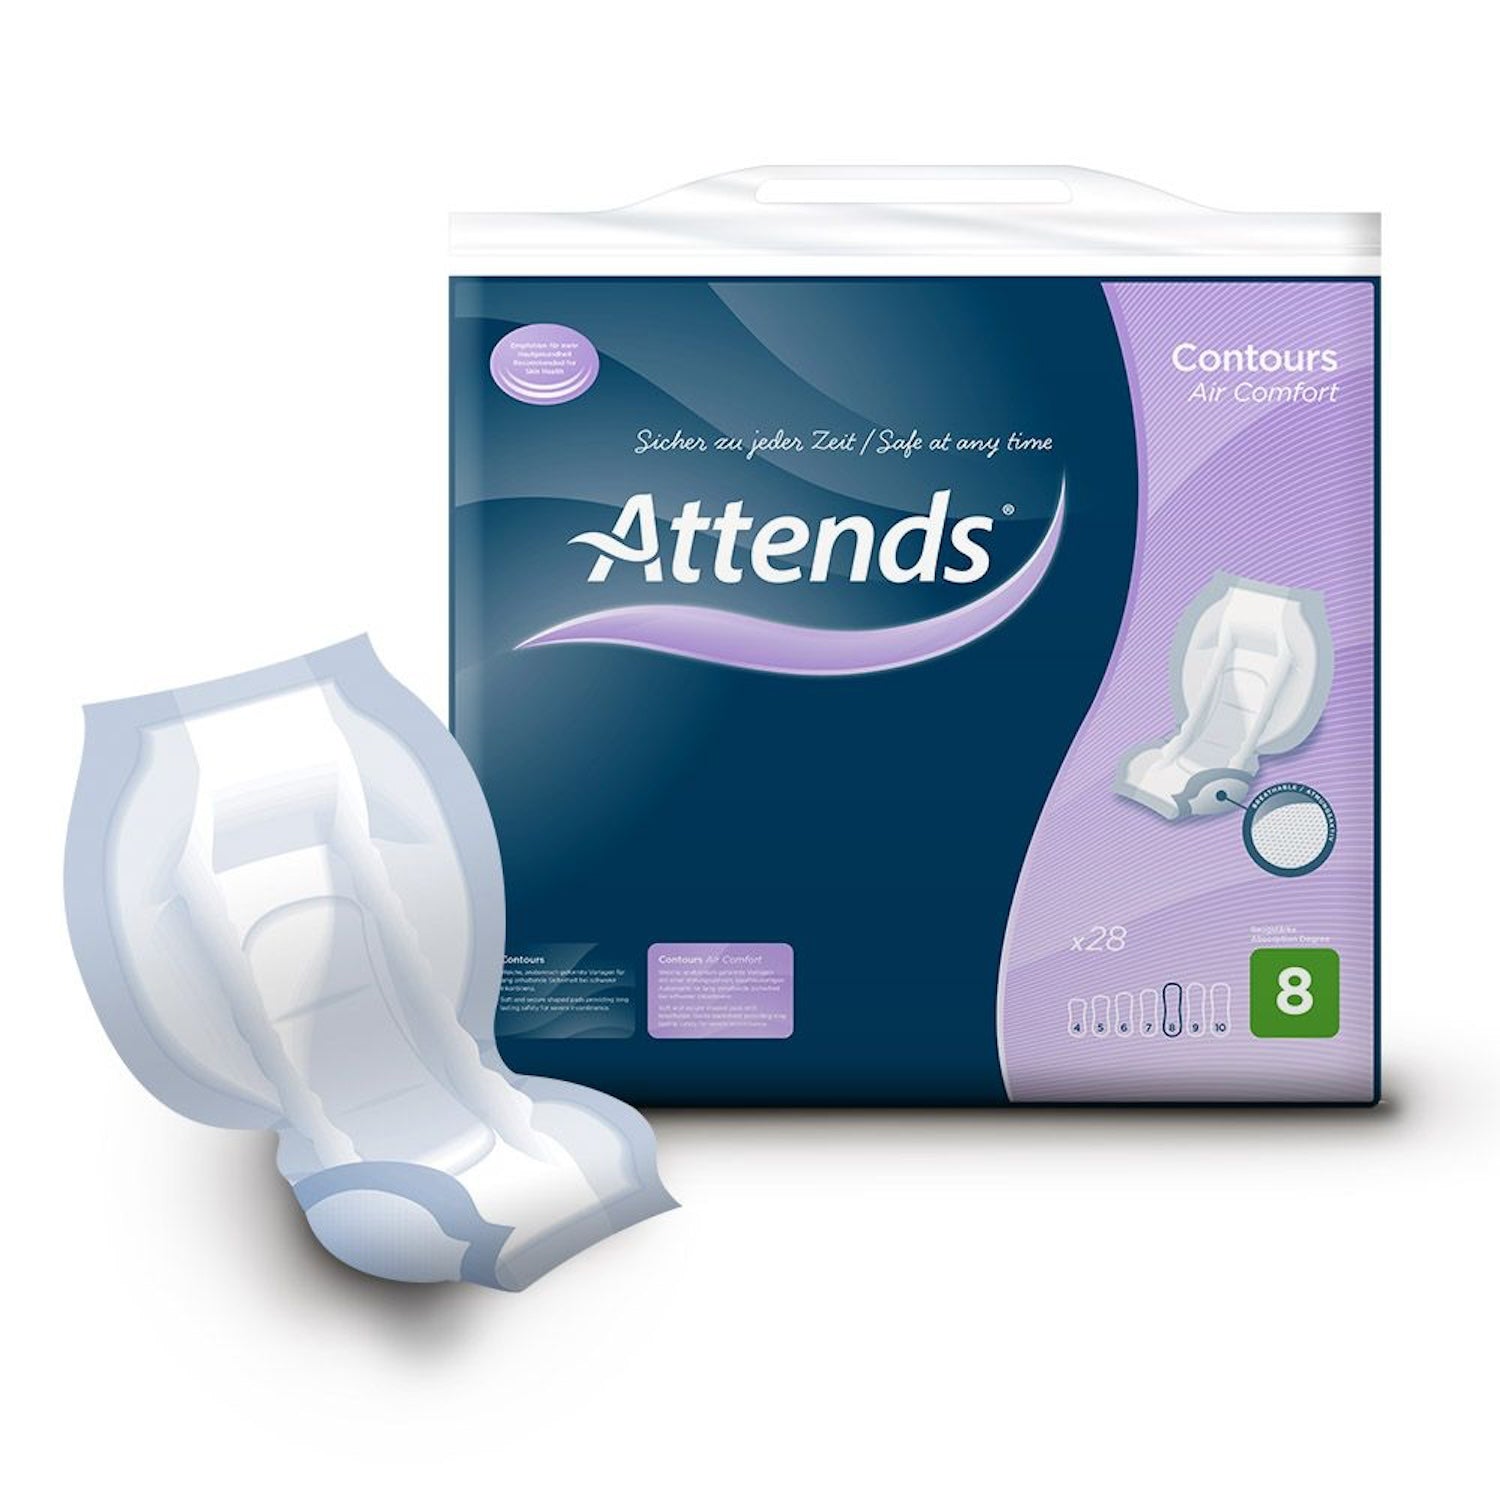 Attends Contours Air Comfort | Pack of  28